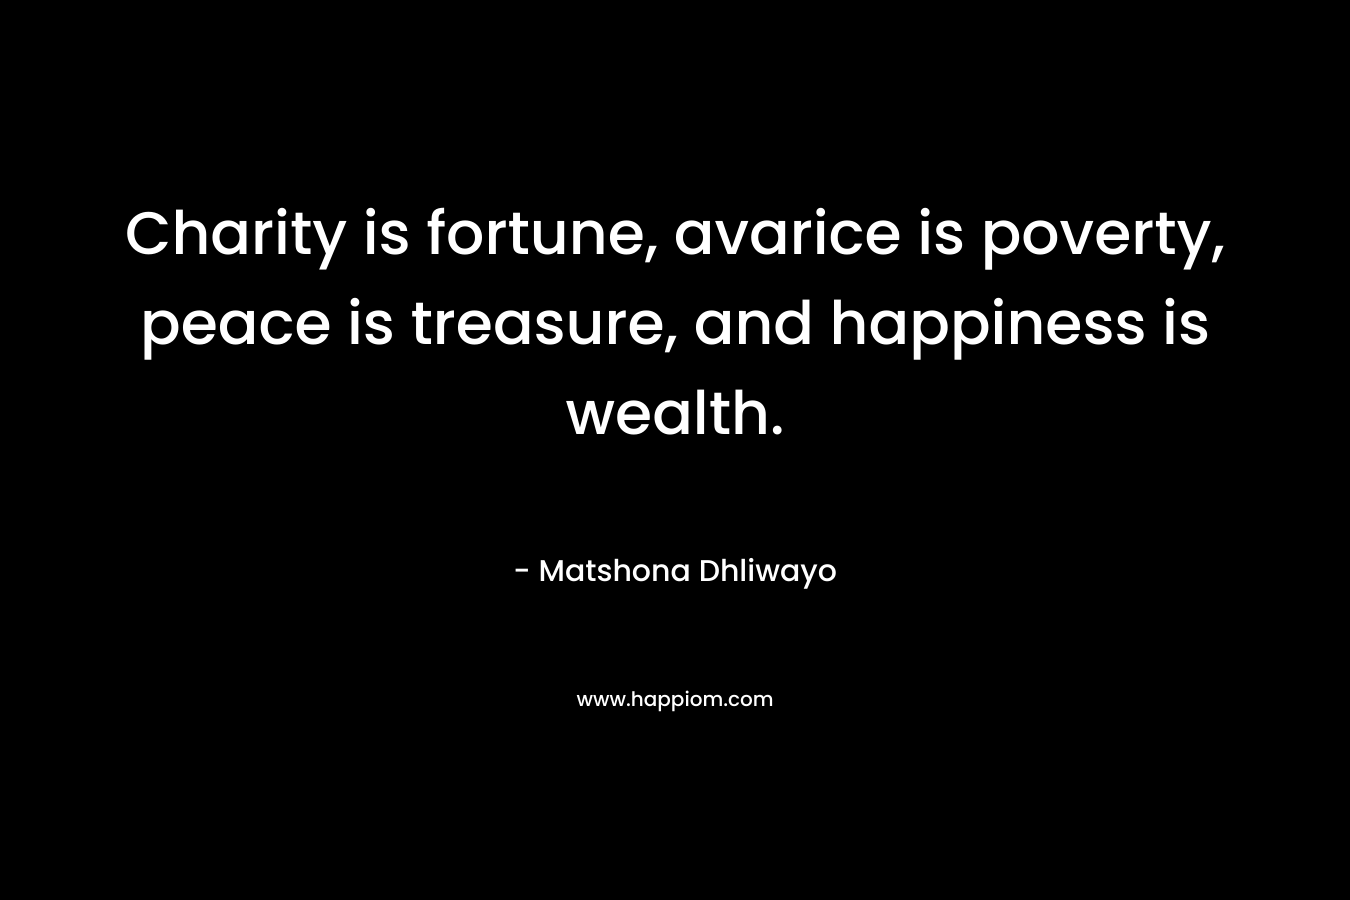 Charity is fortune, avarice is poverty, peace is treasure, and happiness is wealth. – Matshona Dhliwayo